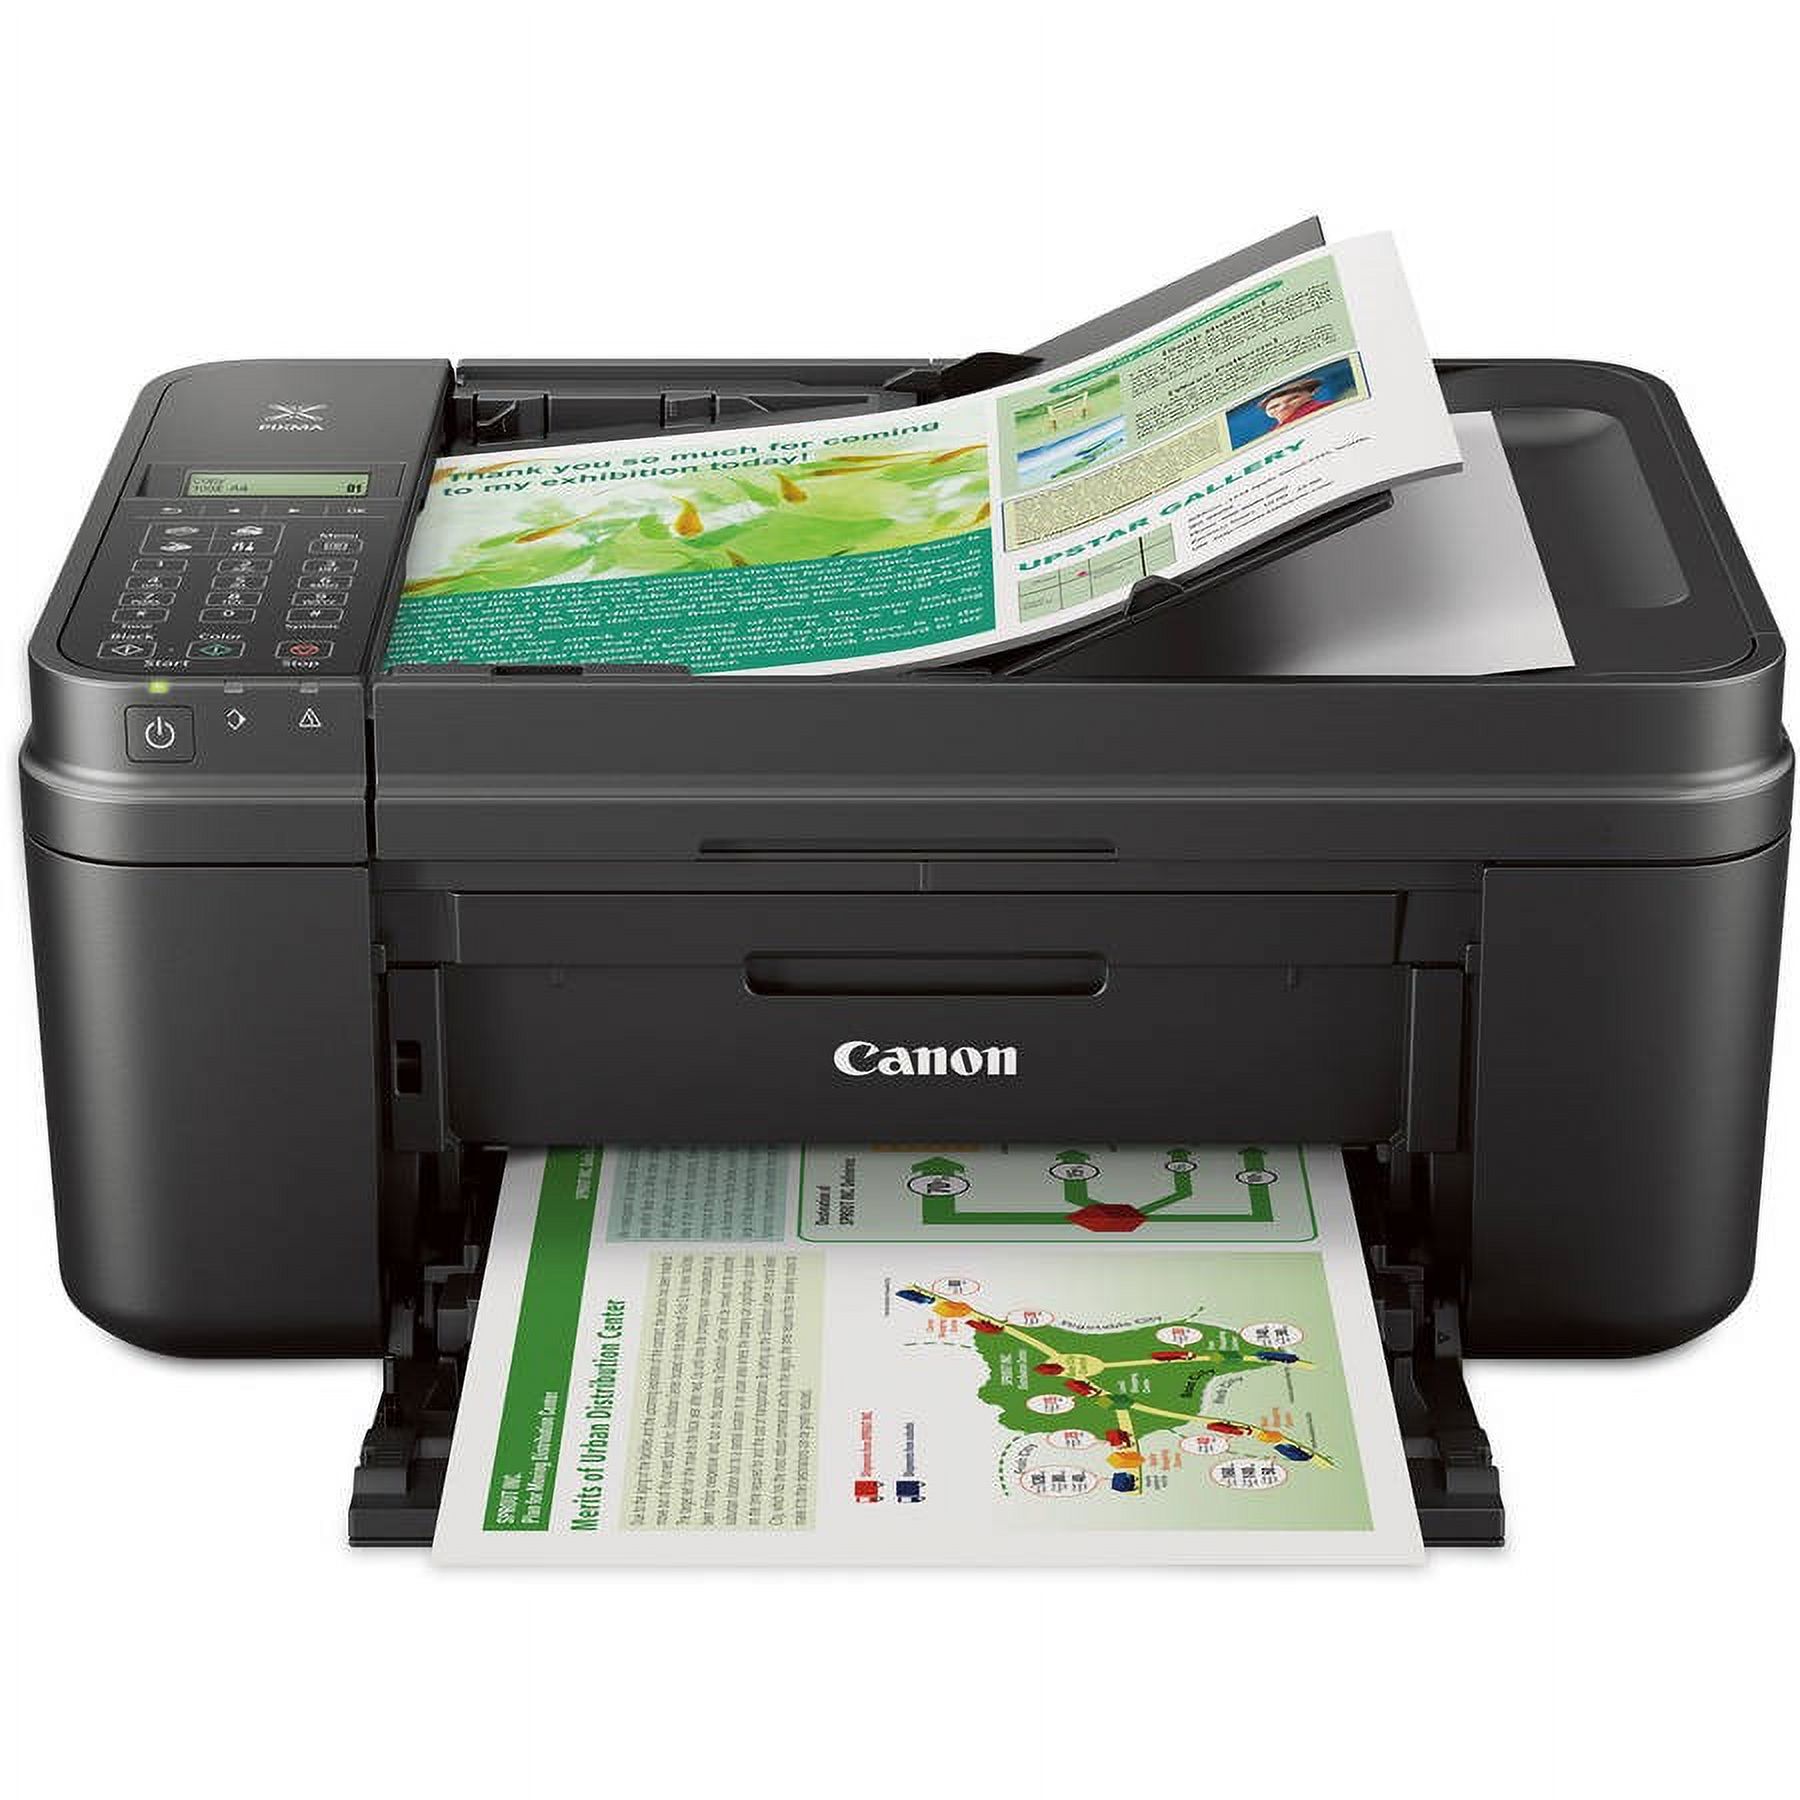 Canon PIXMA MX490 Wireless Office All-in-One Inkjet Printer/Copier/Scanner/Fax Machine - image 4 of 5